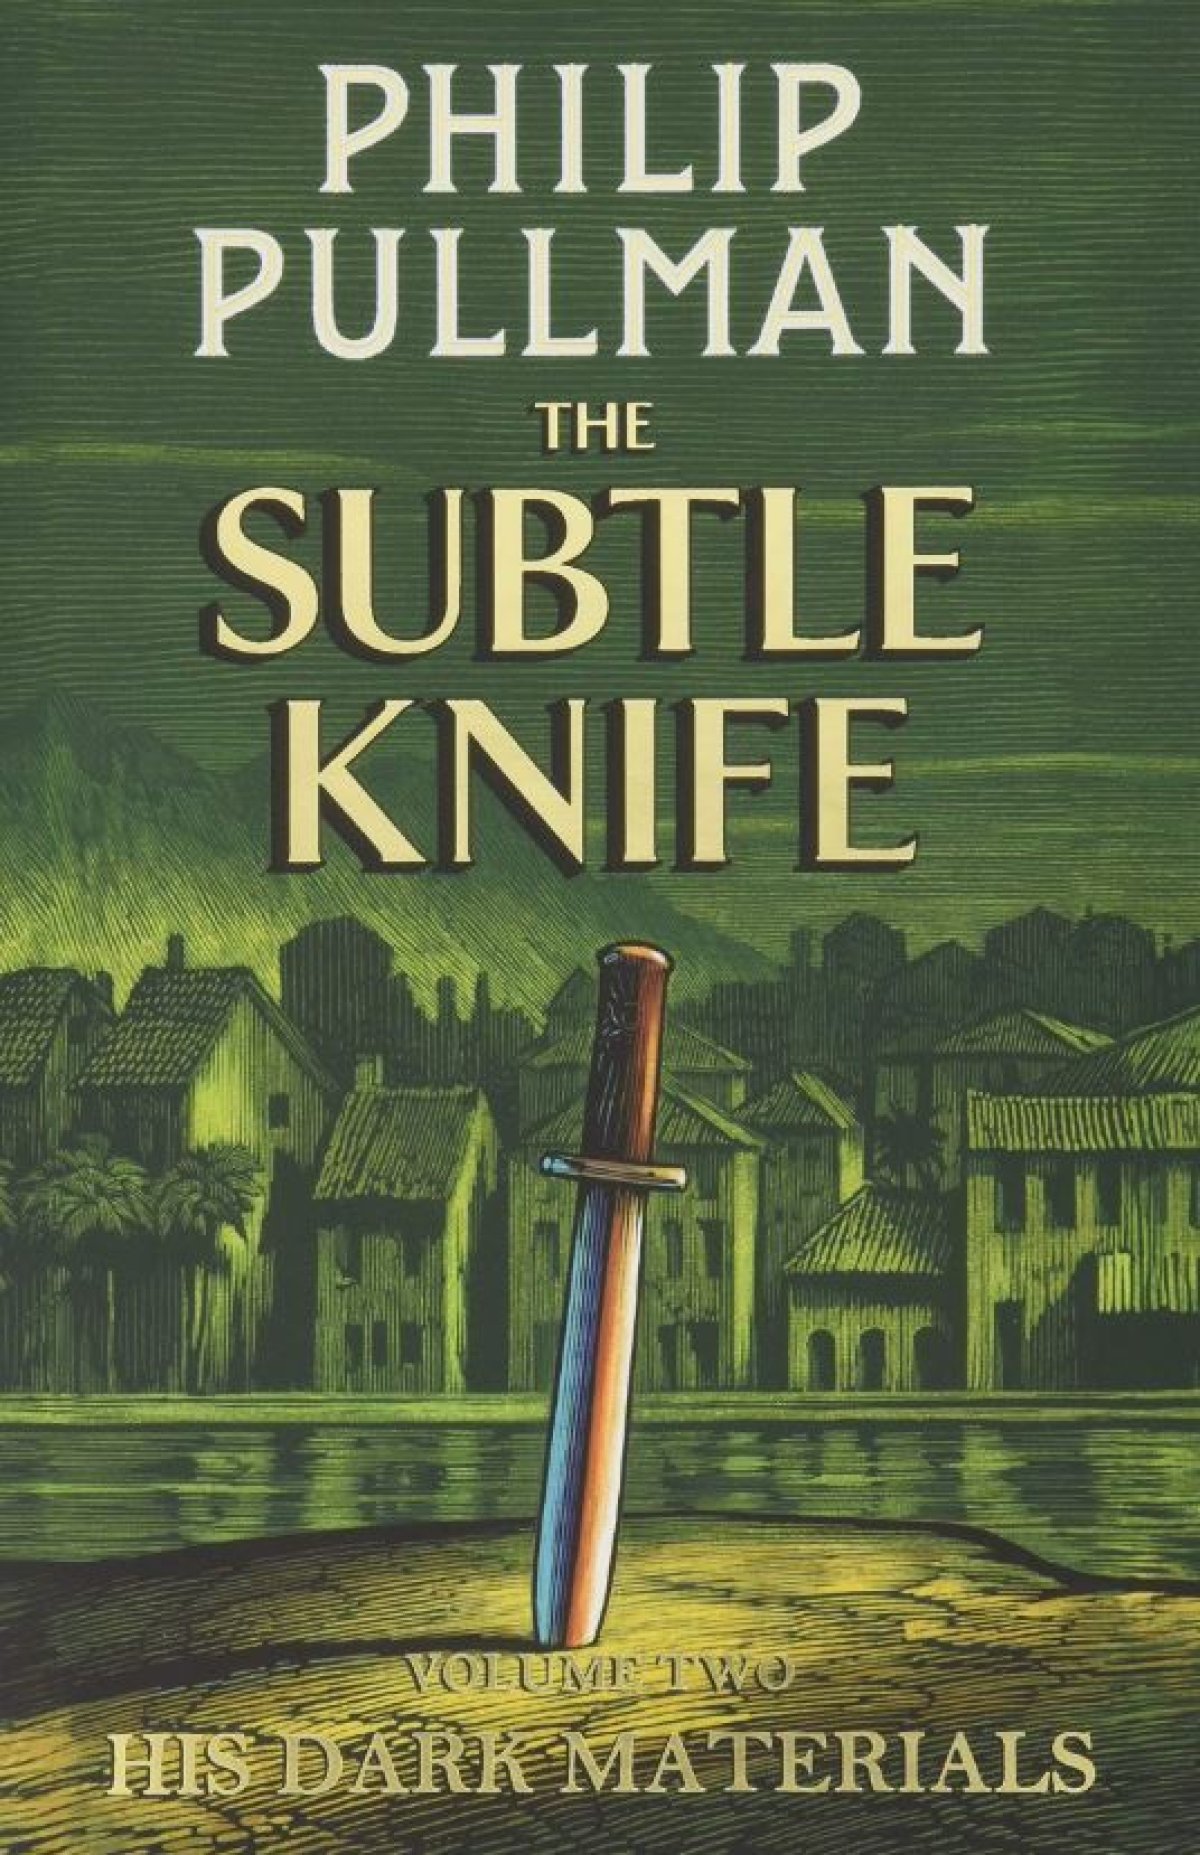 his-dark-materials-book-series-hbo-subtle-knife